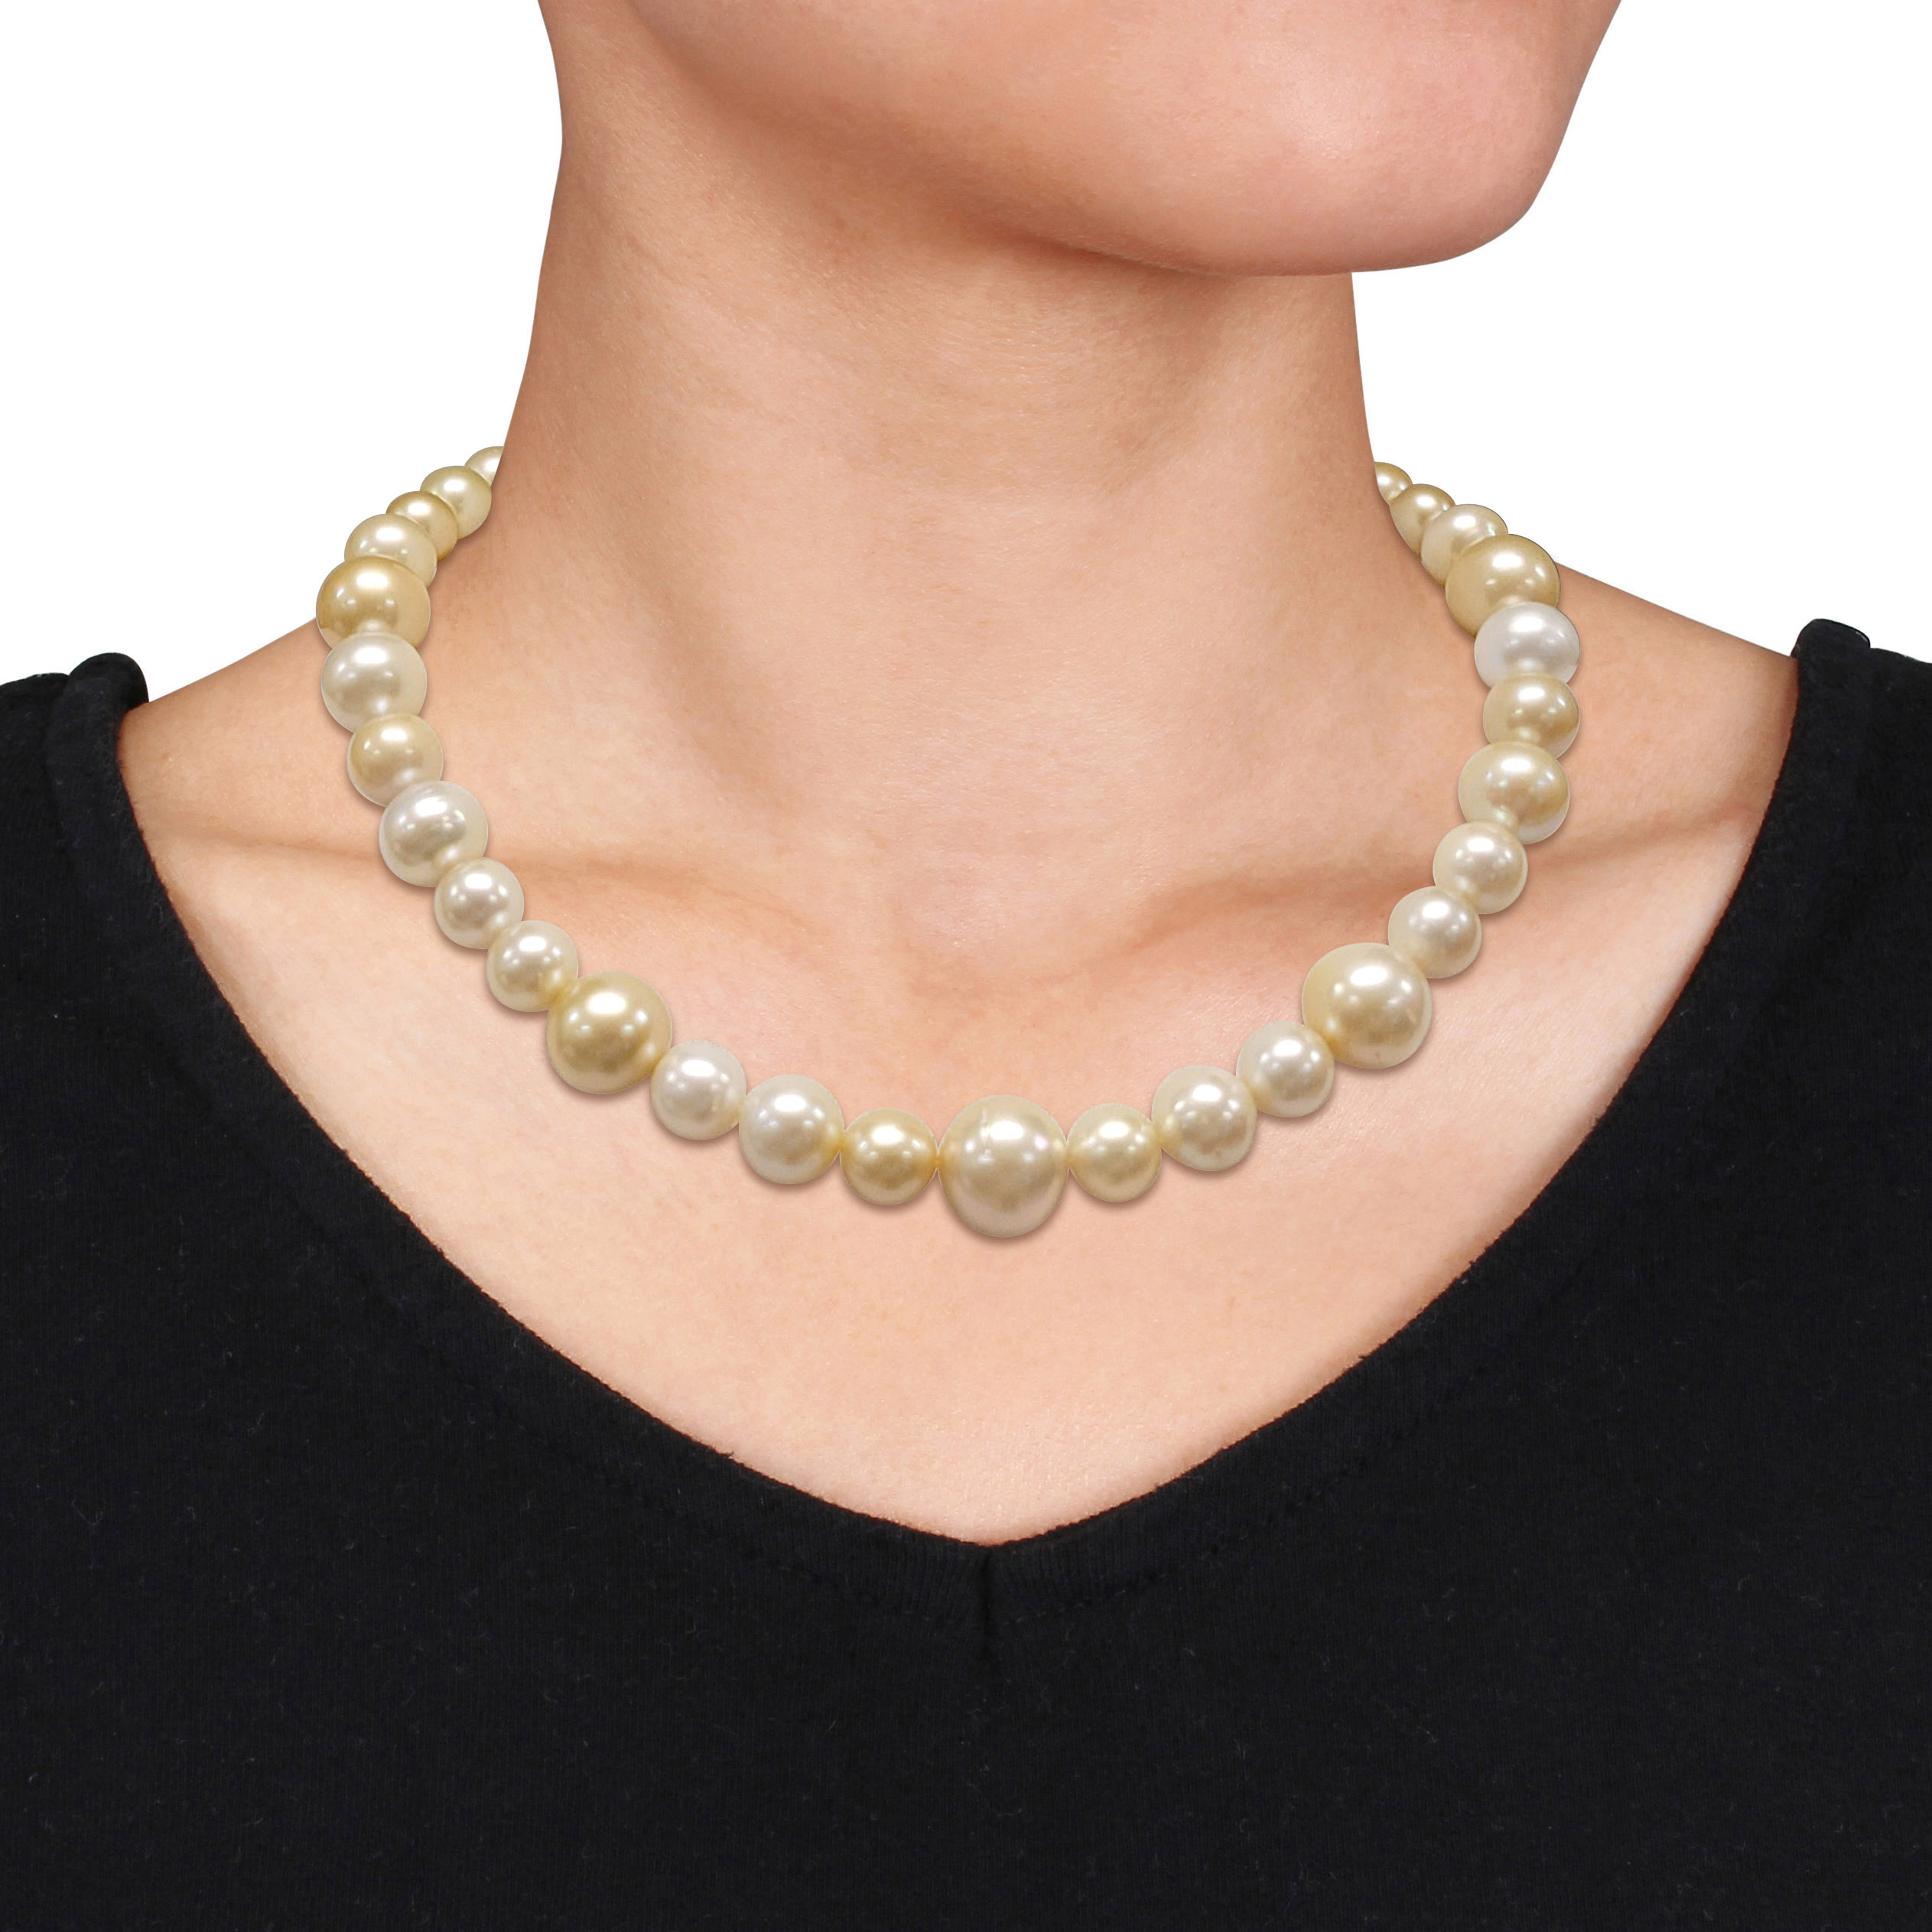 11-15 MM White and Golden South Sea Cultured Pearl Necklace in 14k Yellow Gold - 18 in